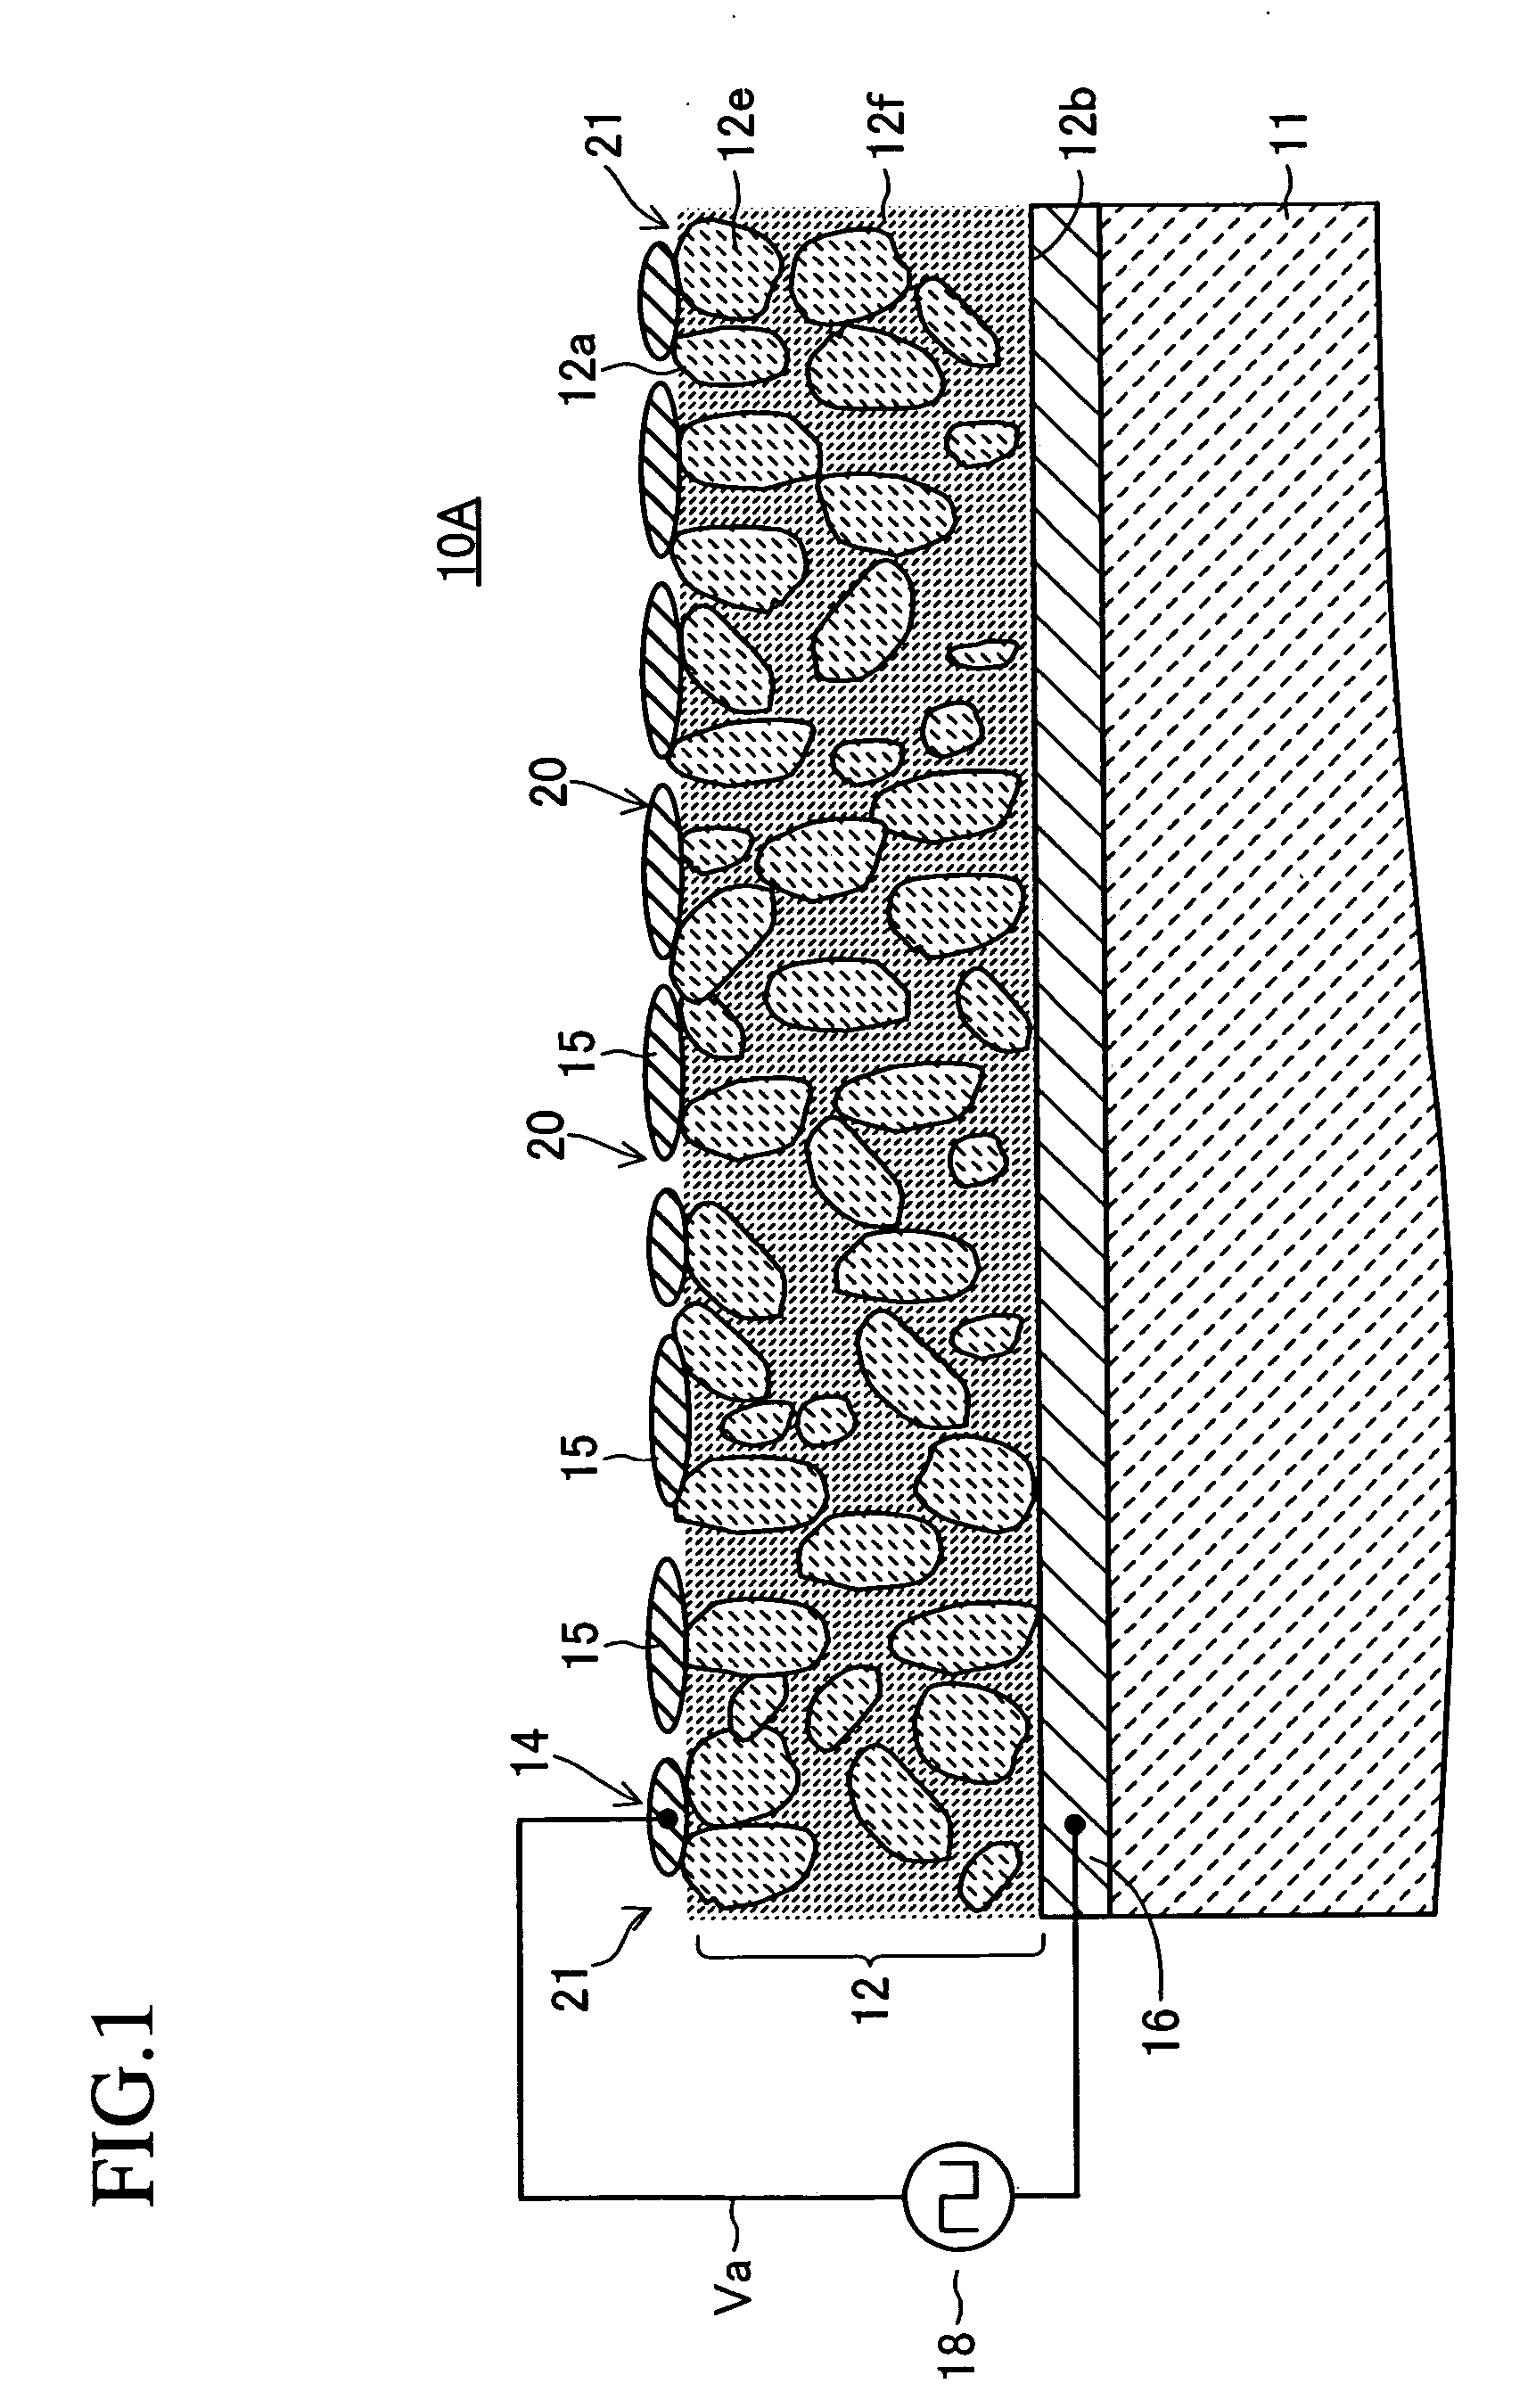 Dielectric device